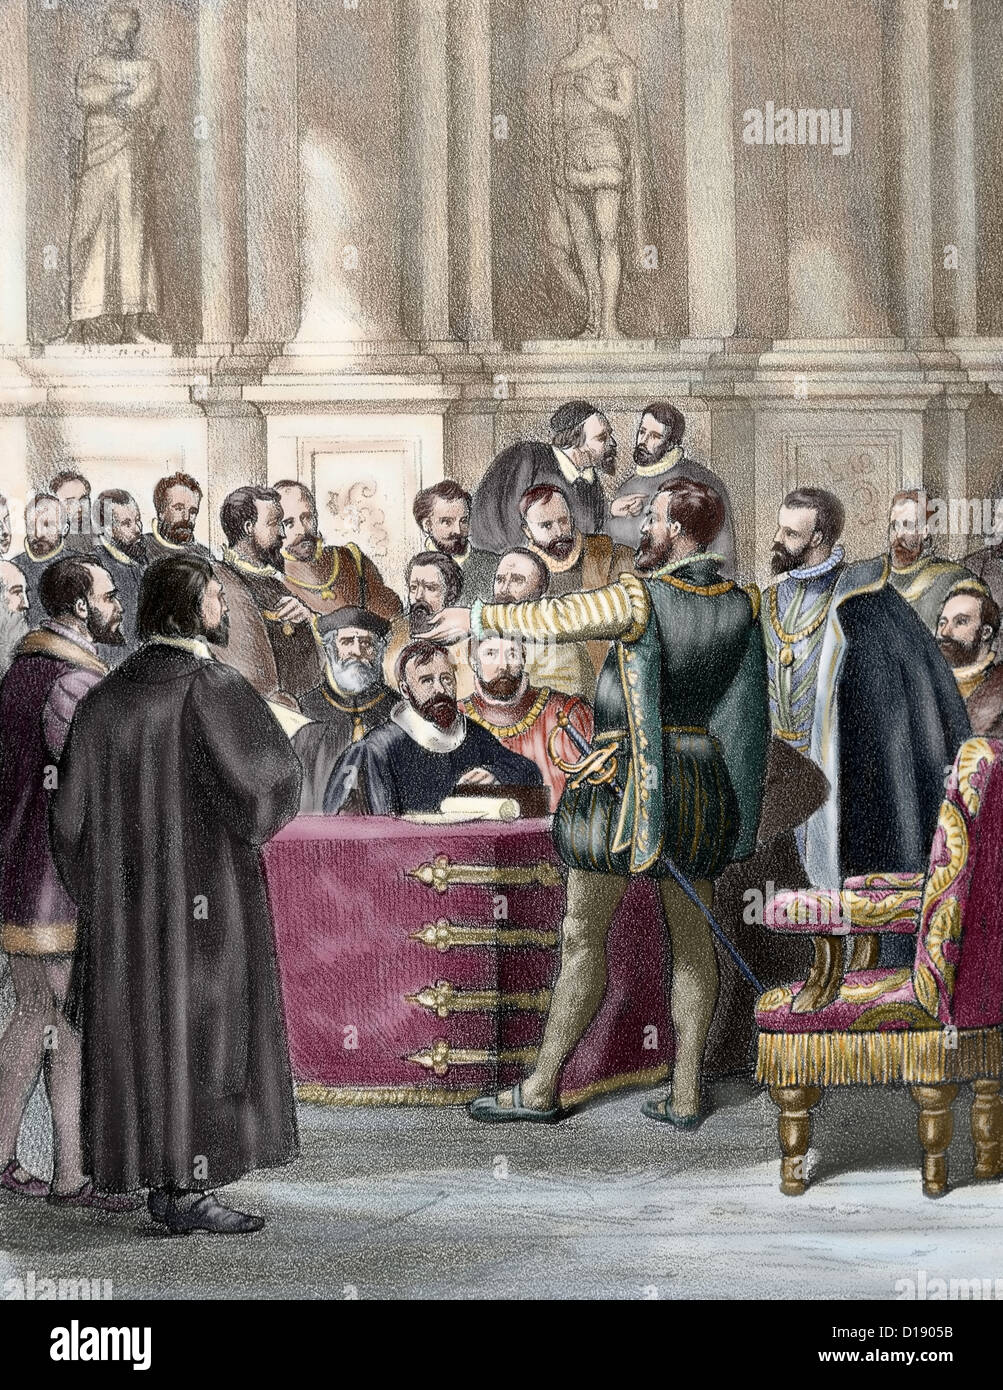 The Diet of Worms, 1521. The Emperor Charles V presiding. Colored engraving. Stock Photo